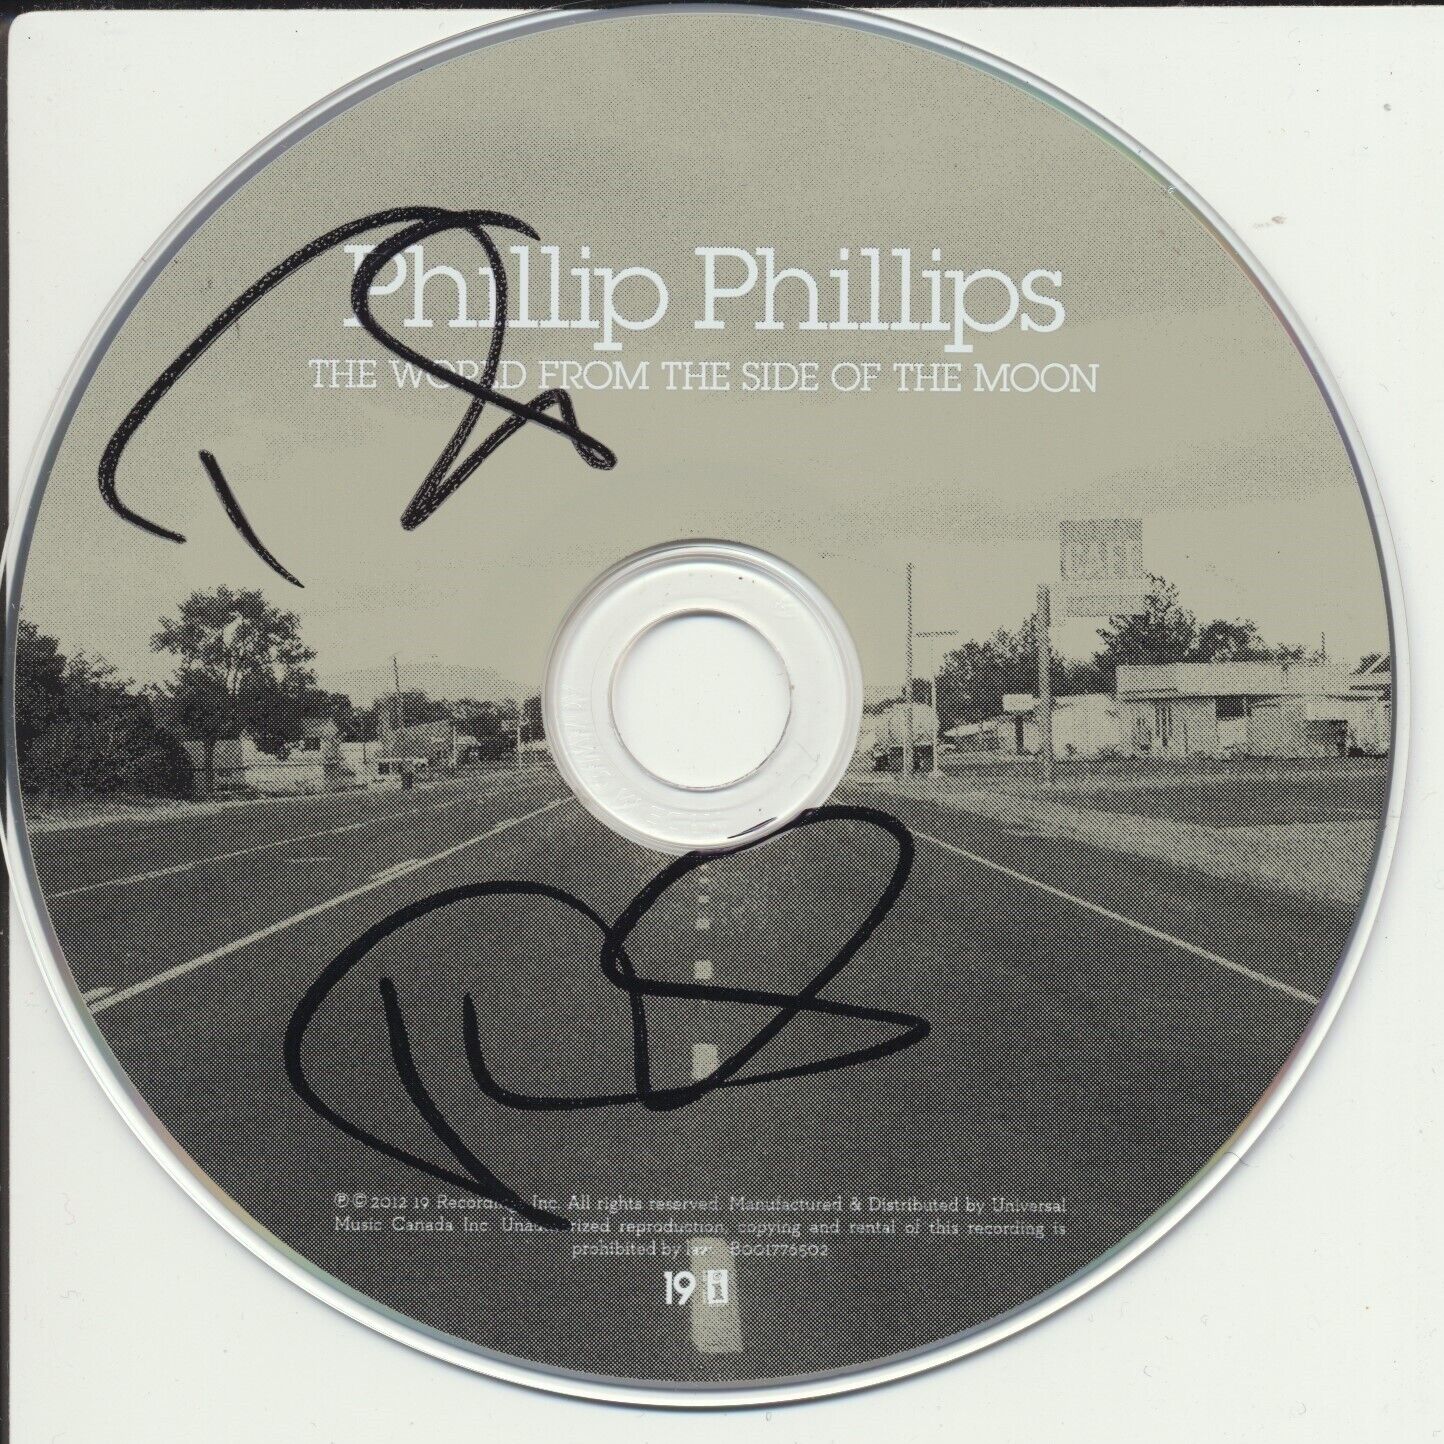 PHILLIP PHILLIPS SIGNED THE WORLD FROM THIS SIDE OF THE MOON CD DISK